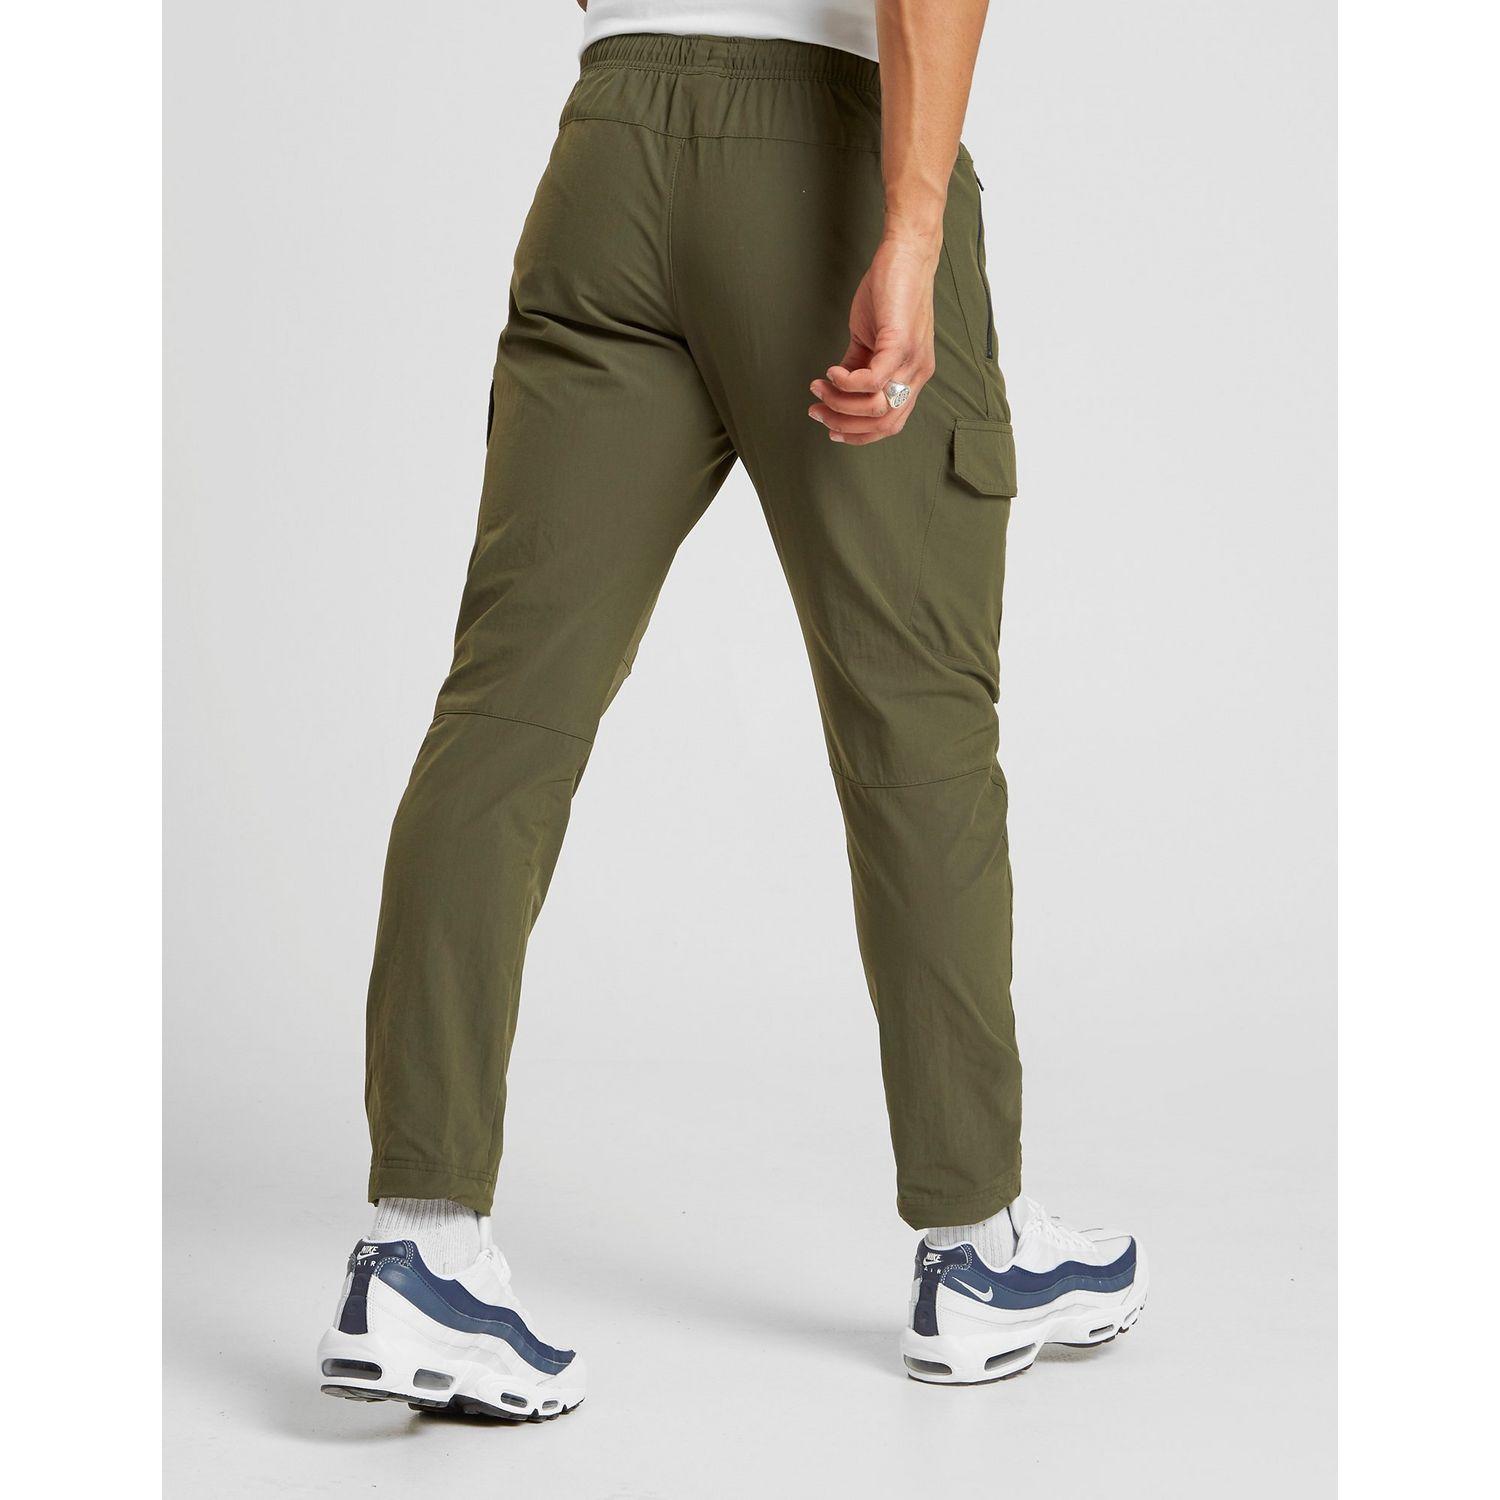 Nike Cotton Air Max Cargo Track Pants 